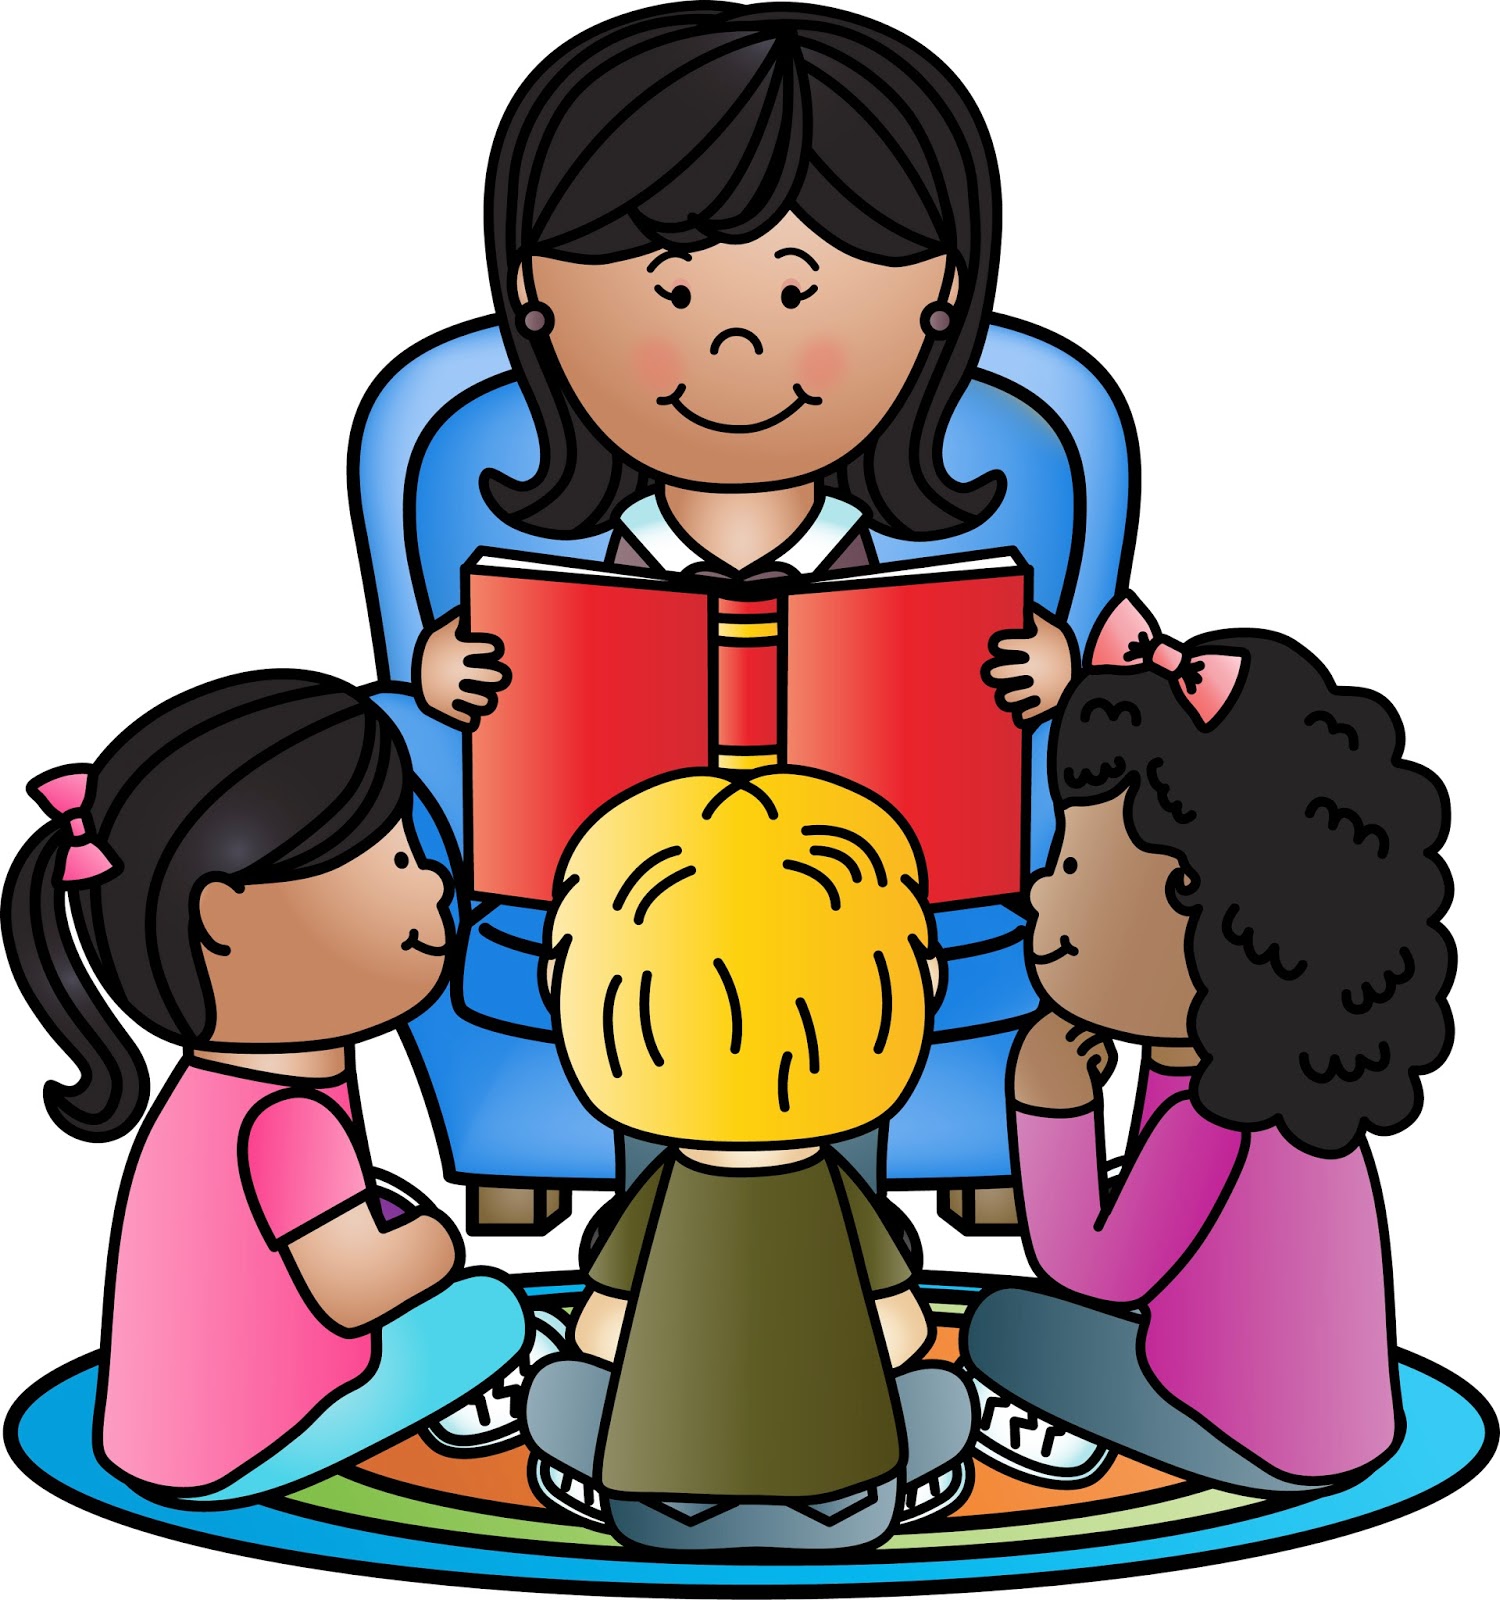 Students reading teacher reading with students clip art clipart